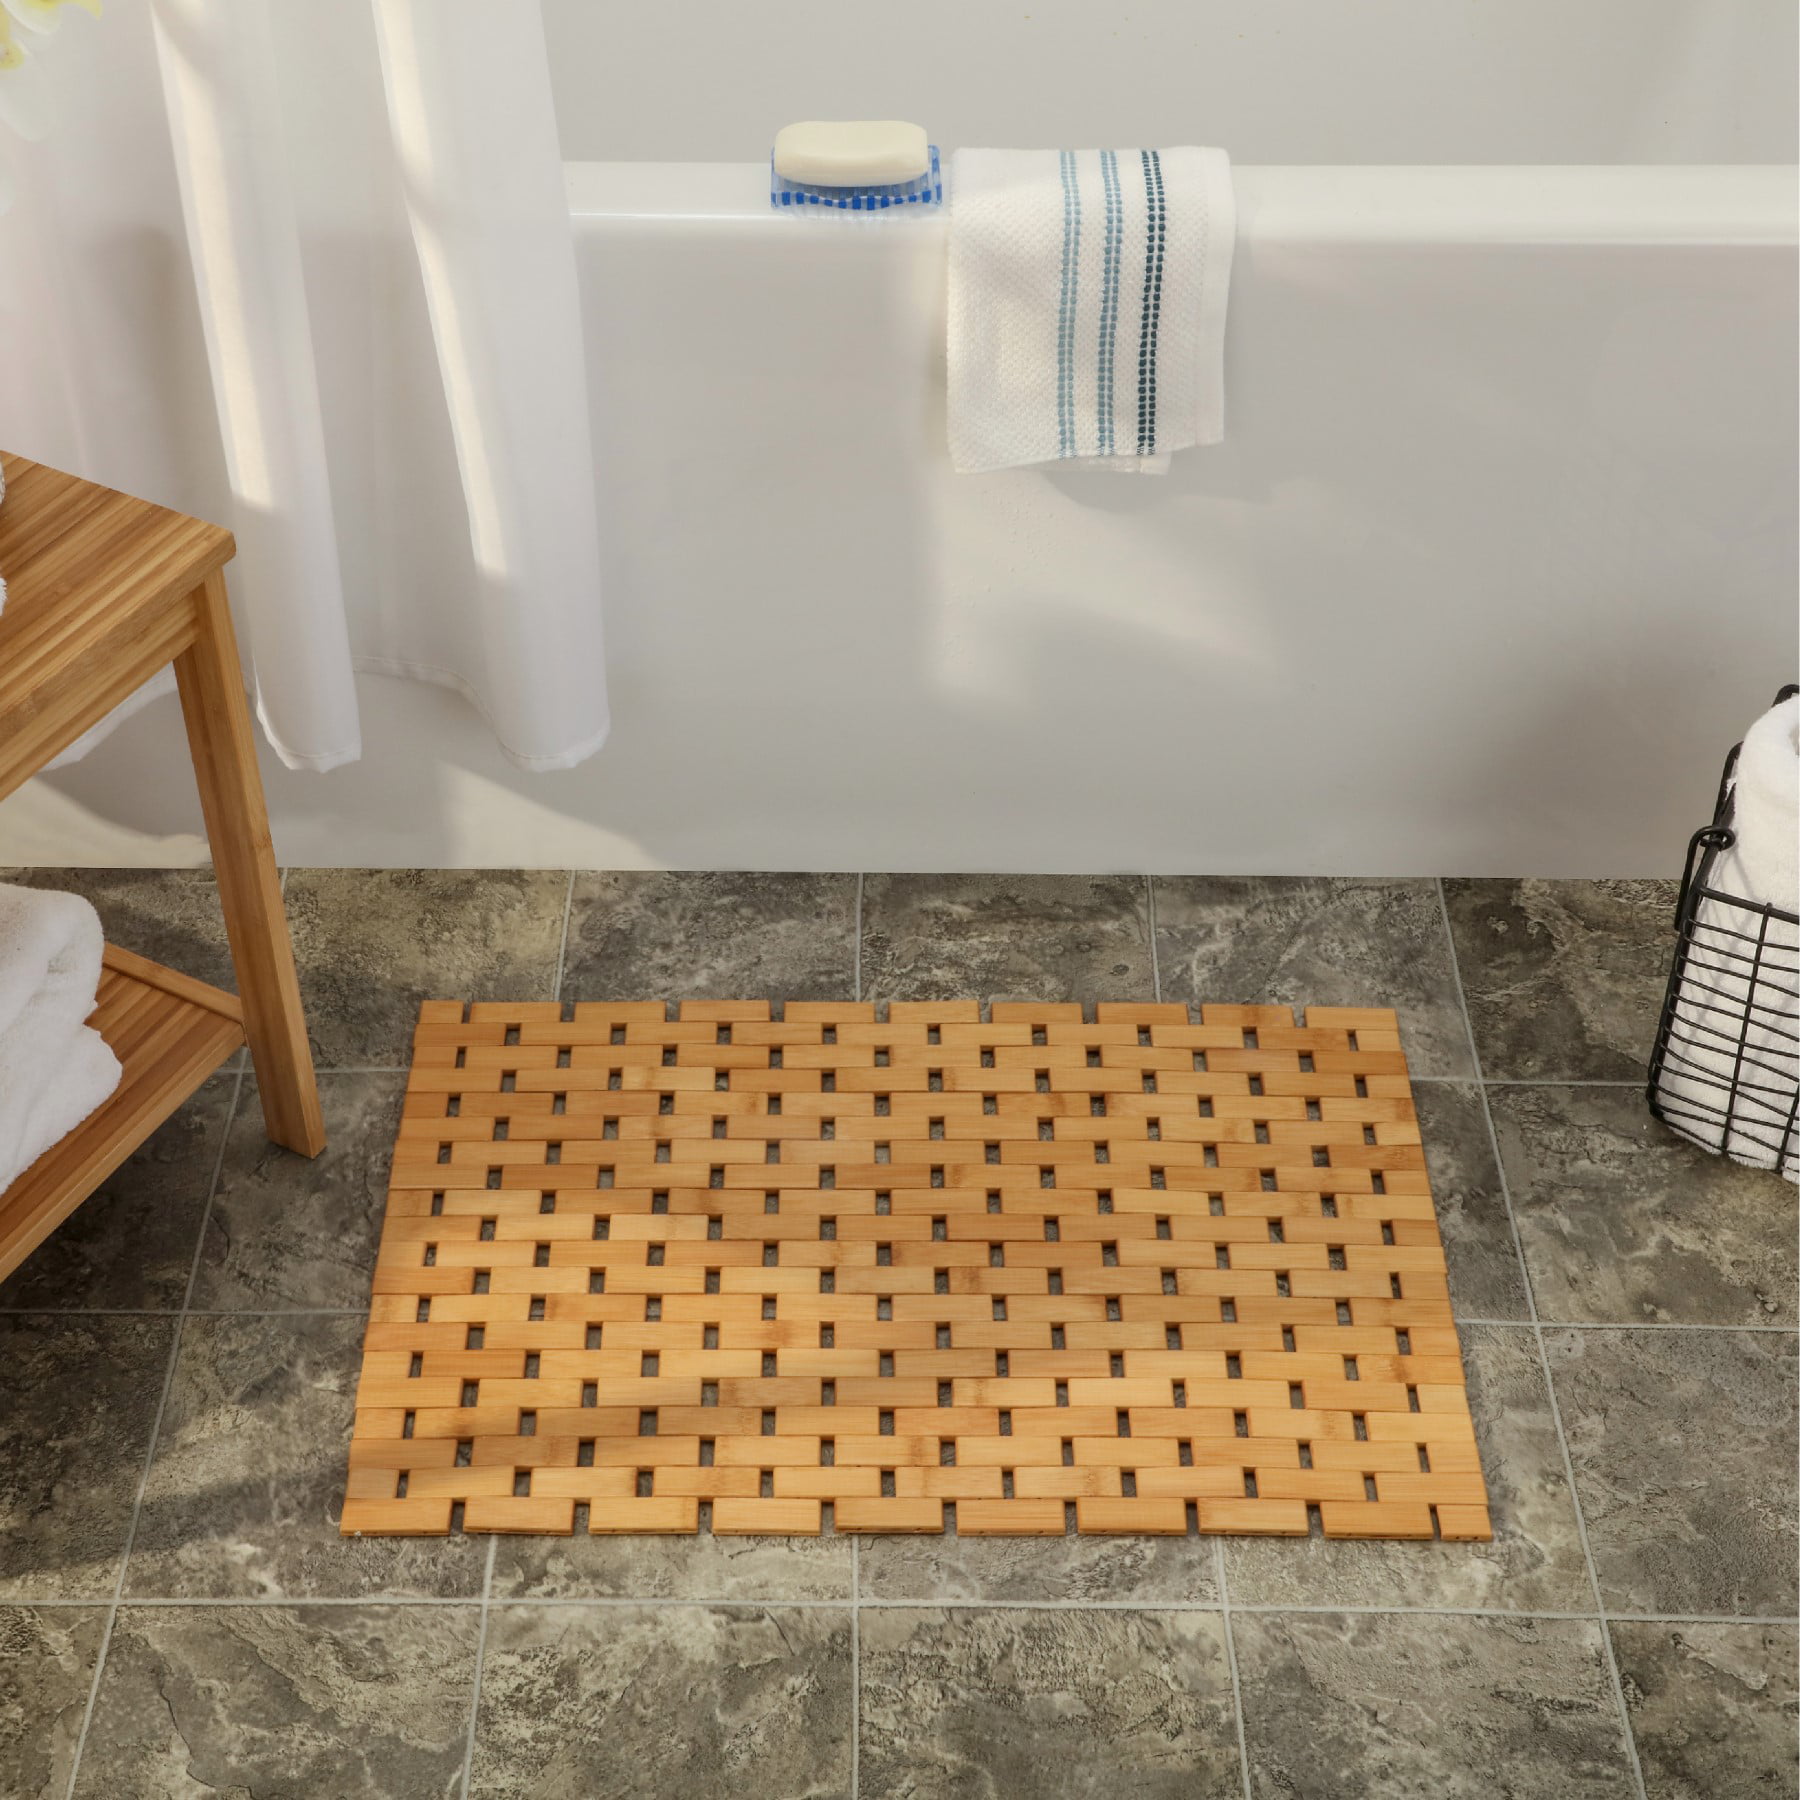 Brand: SlipBath Type: PVC Bath Mat Specs: Anti Slip Suction, Bathroom  Carpet Set Keywords: Toilet/Shower/Bathroom Points: Decorative, Features:  Non Toxic, Mildew Resistant Application: Ideal For Toilets, Showers, And  Bathrooms Title: SlipBa From